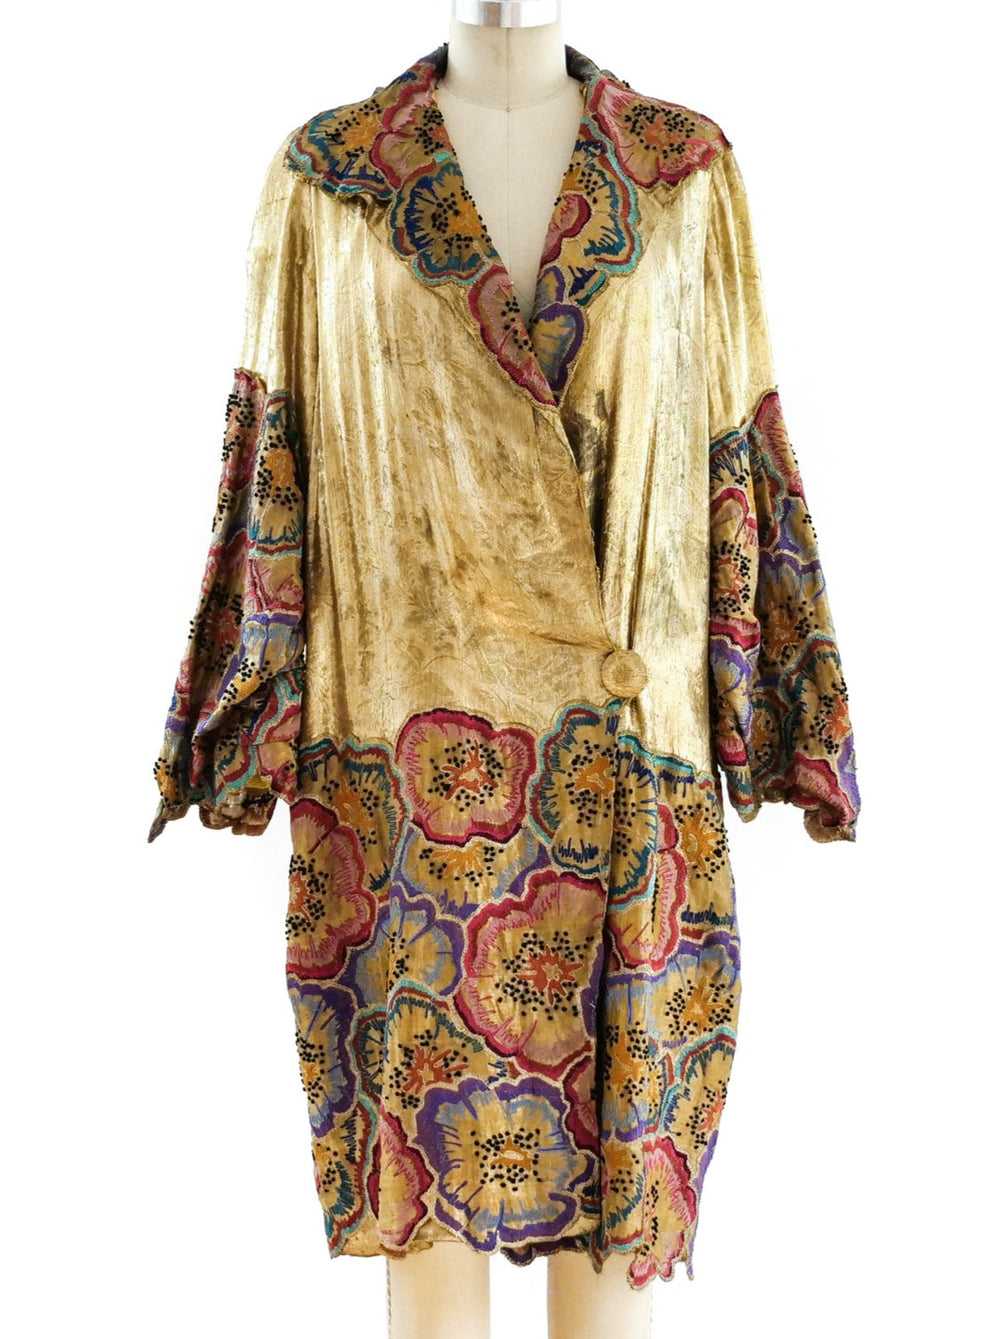 1920's Gold Lame Opera Coat with Floral Embroidery - image 1